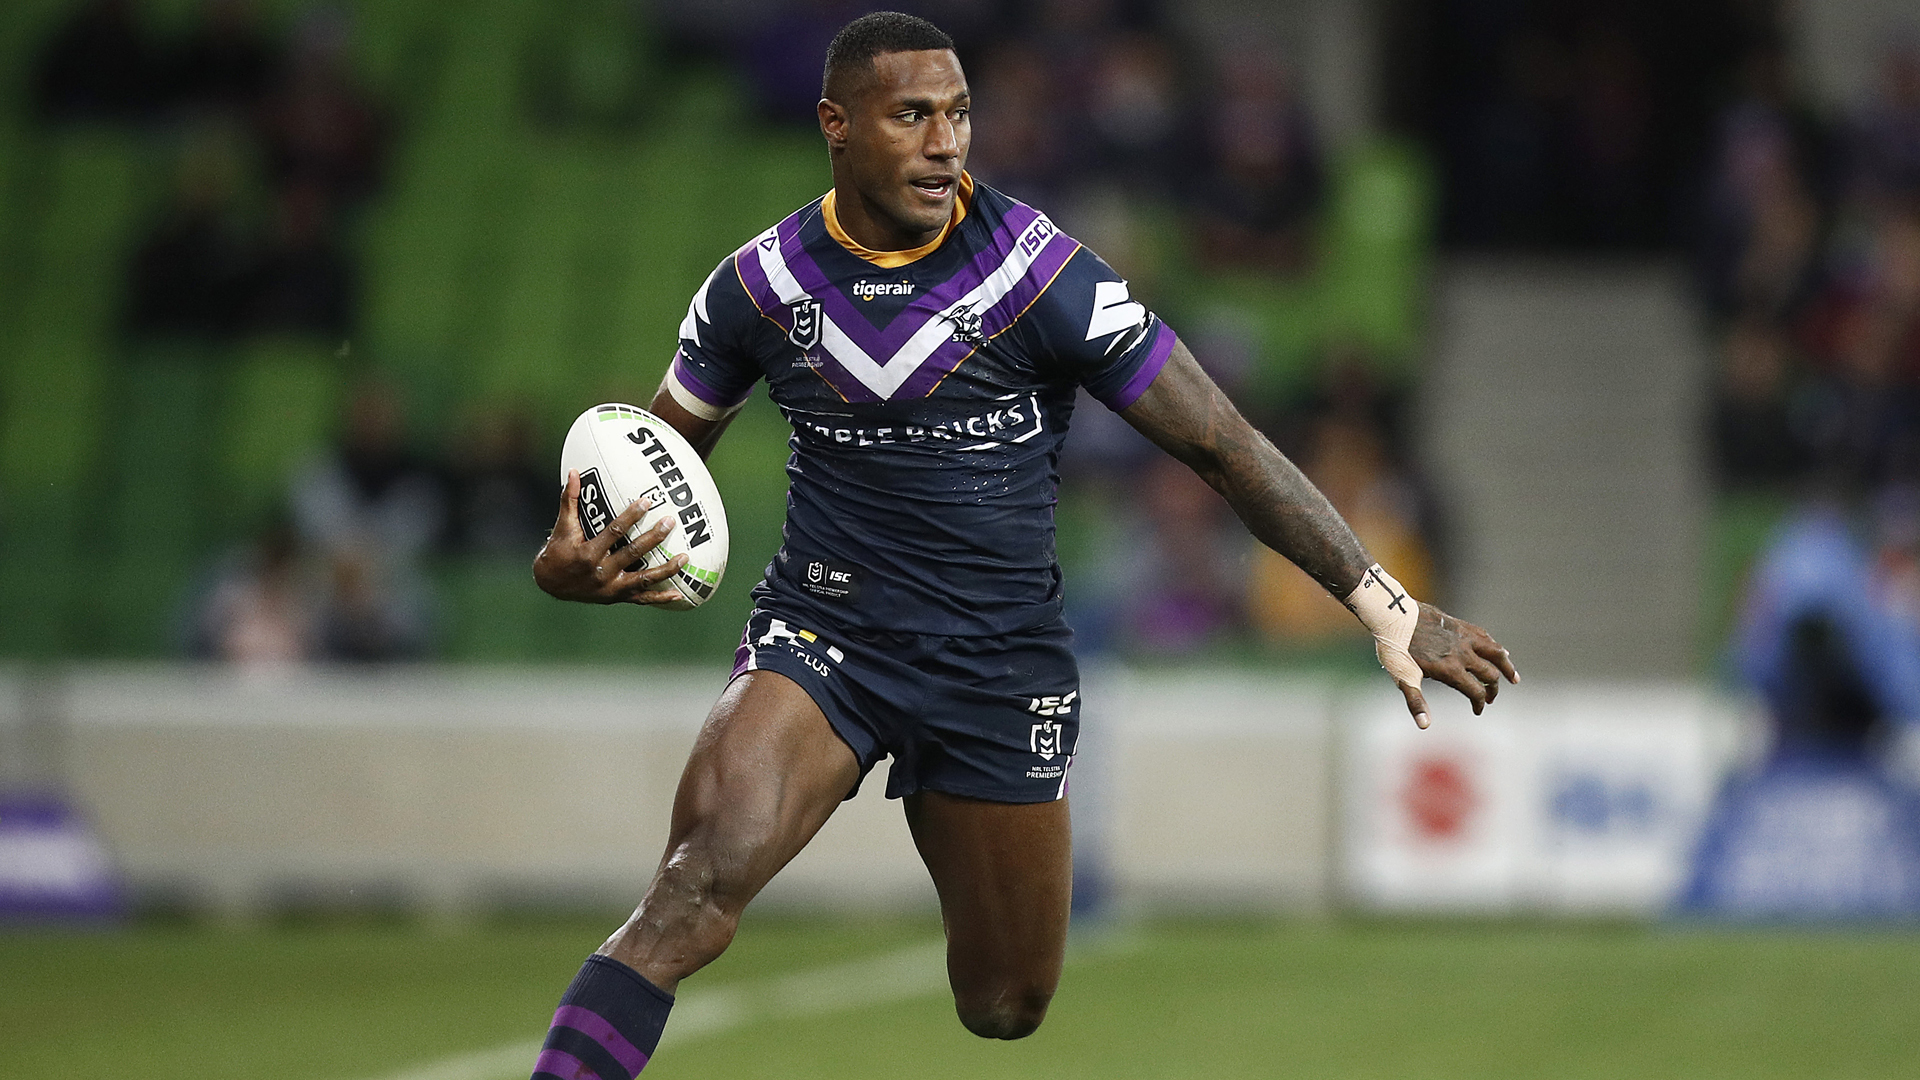 Suliasi Vunivalu will leave the Melbourne Storm to join Super Rugby side the Reds in 2021.